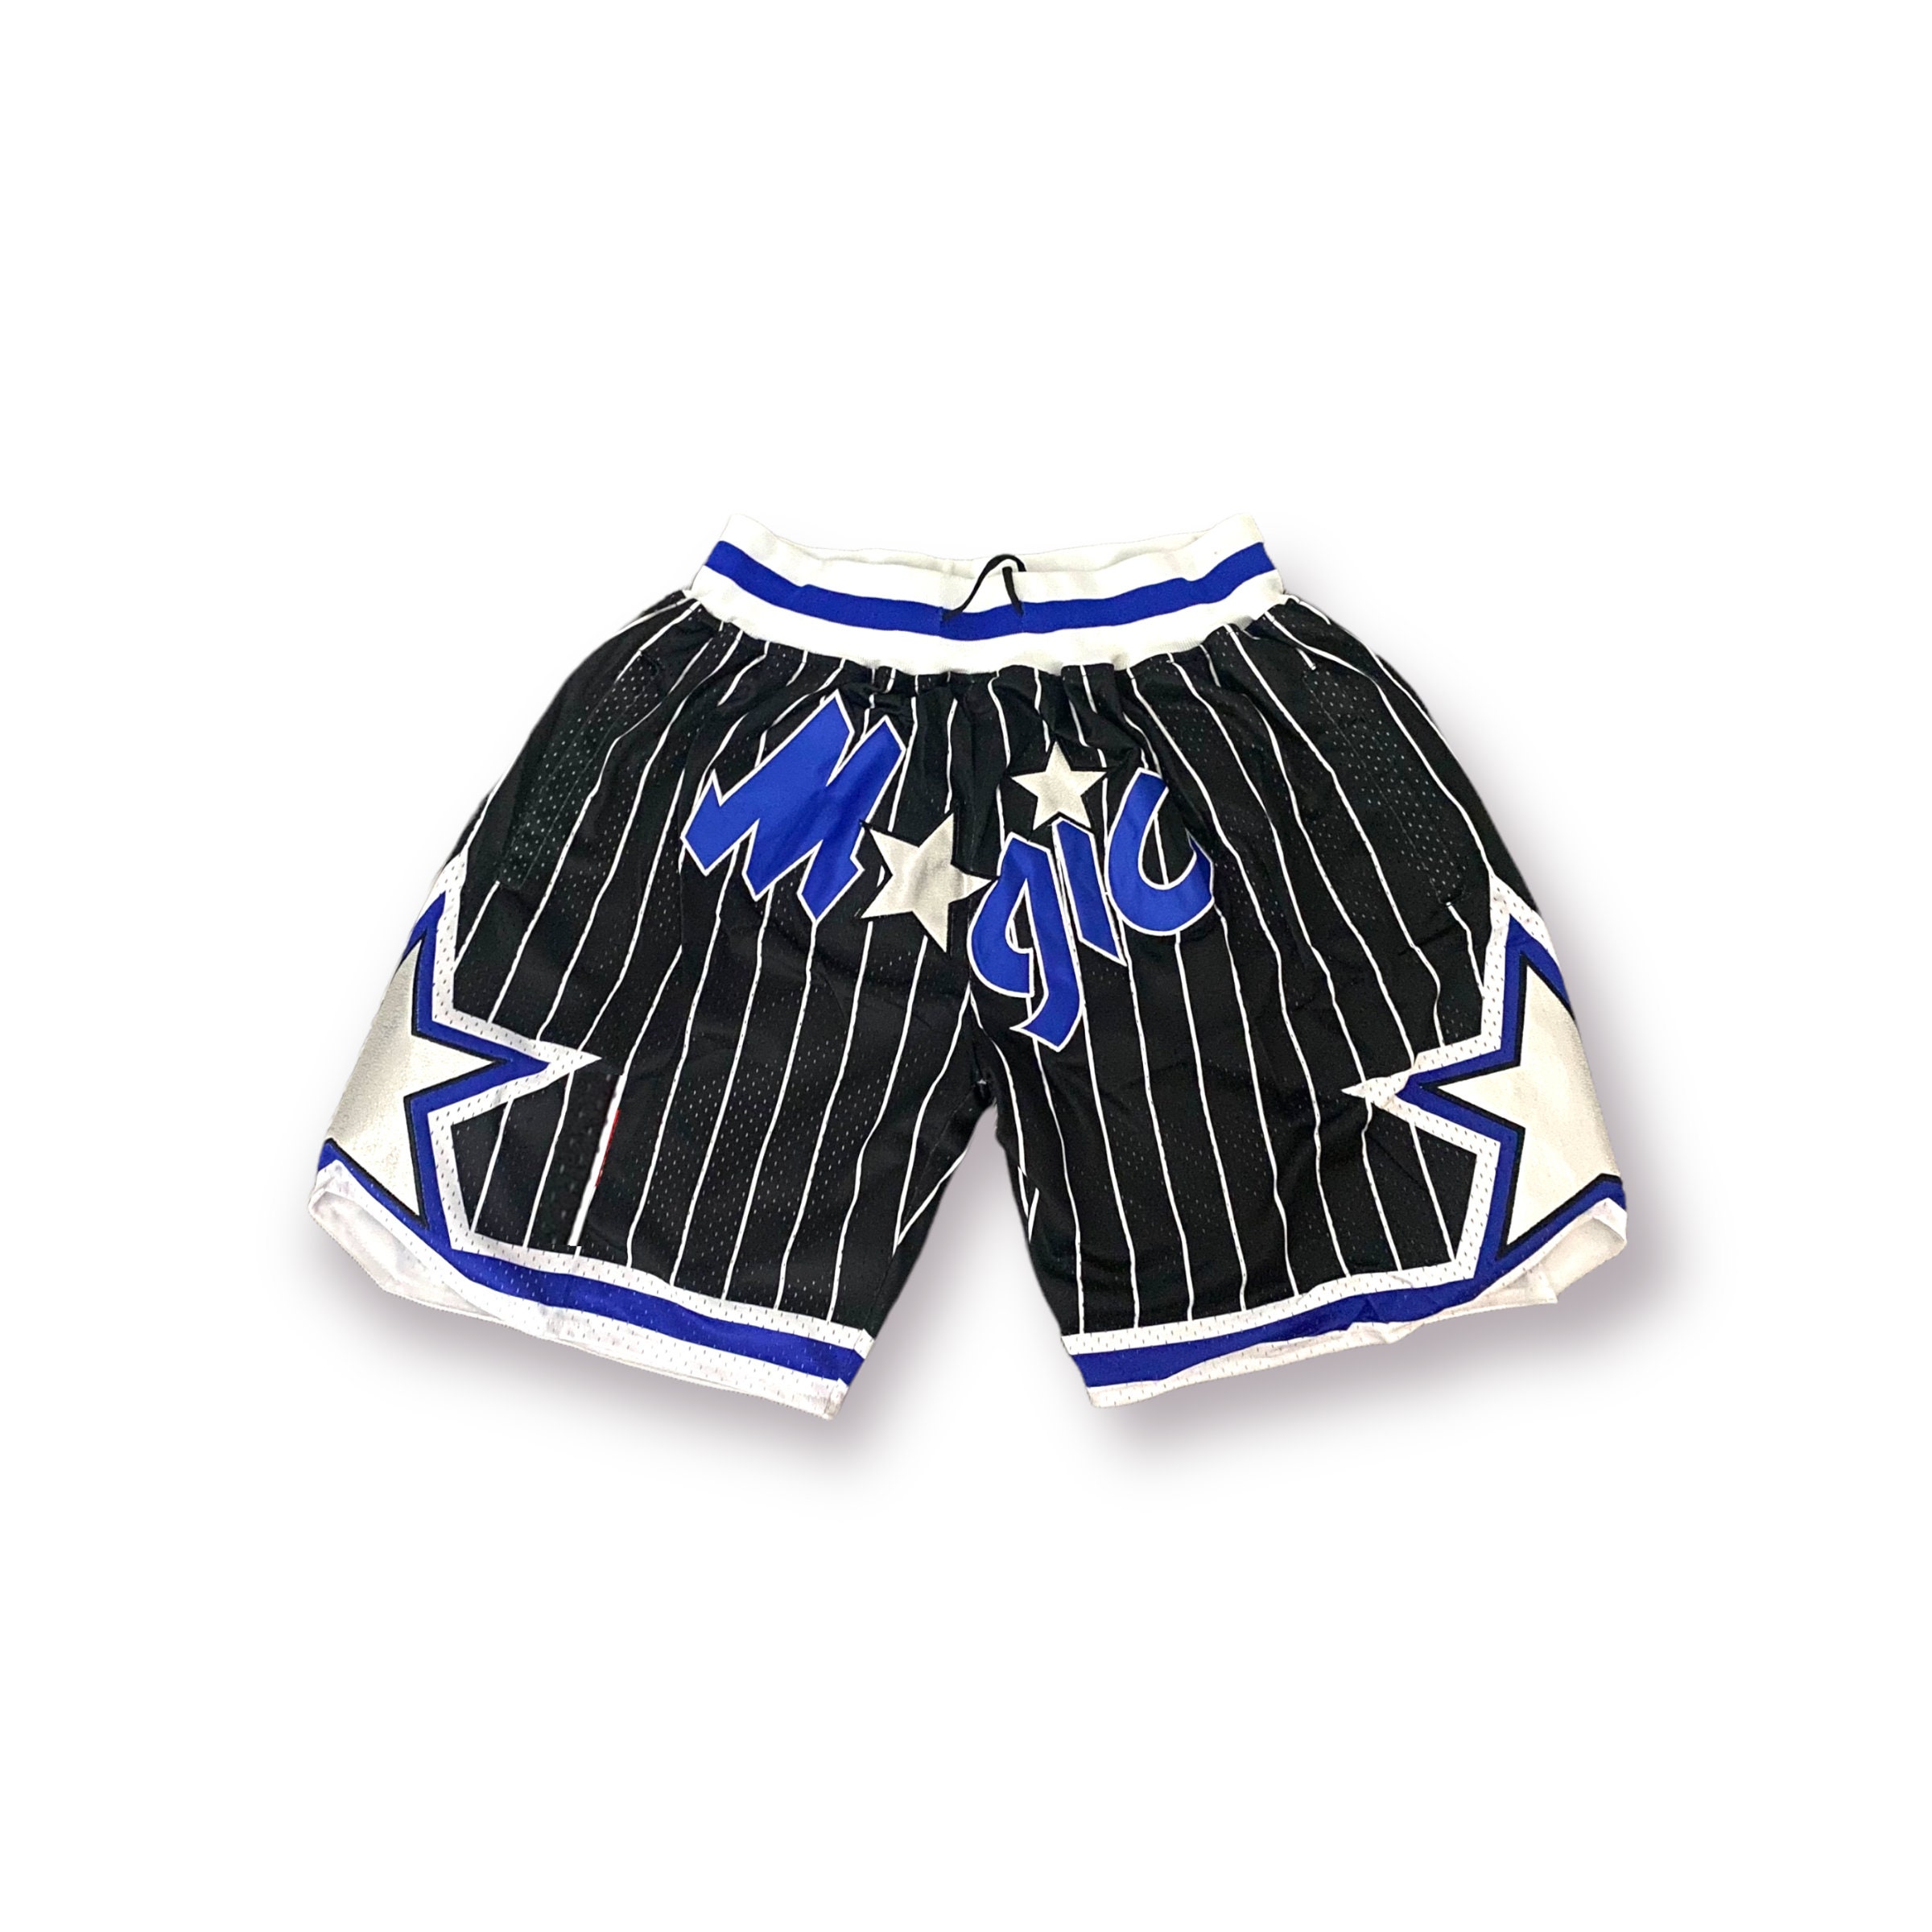 JUST Don, Warriors vintage embroidered mesh shorts, brand-new jerseys -  Vinted